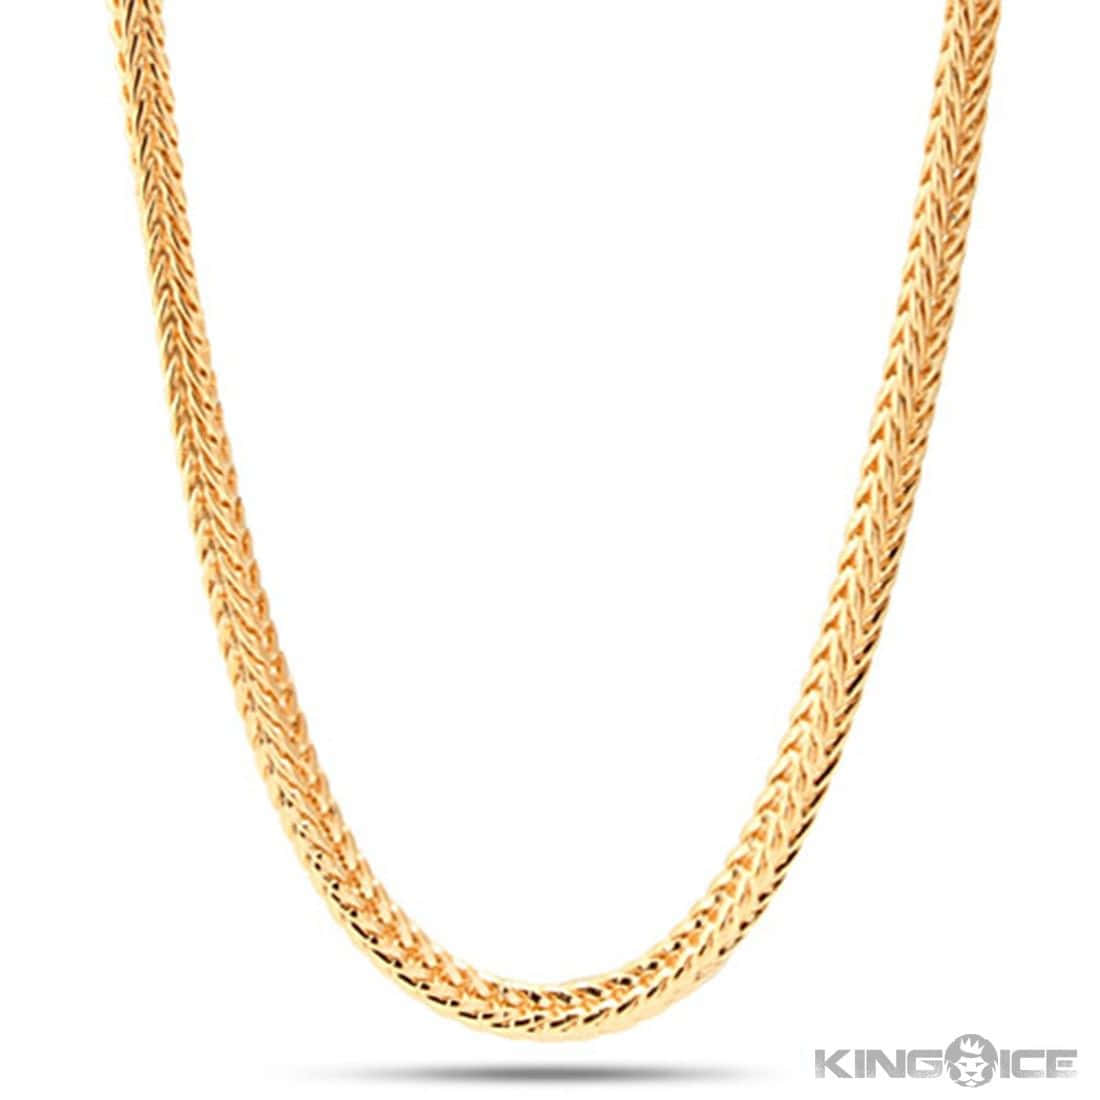 10mm Yellow 18k gold plated chain men's necklace 50cm